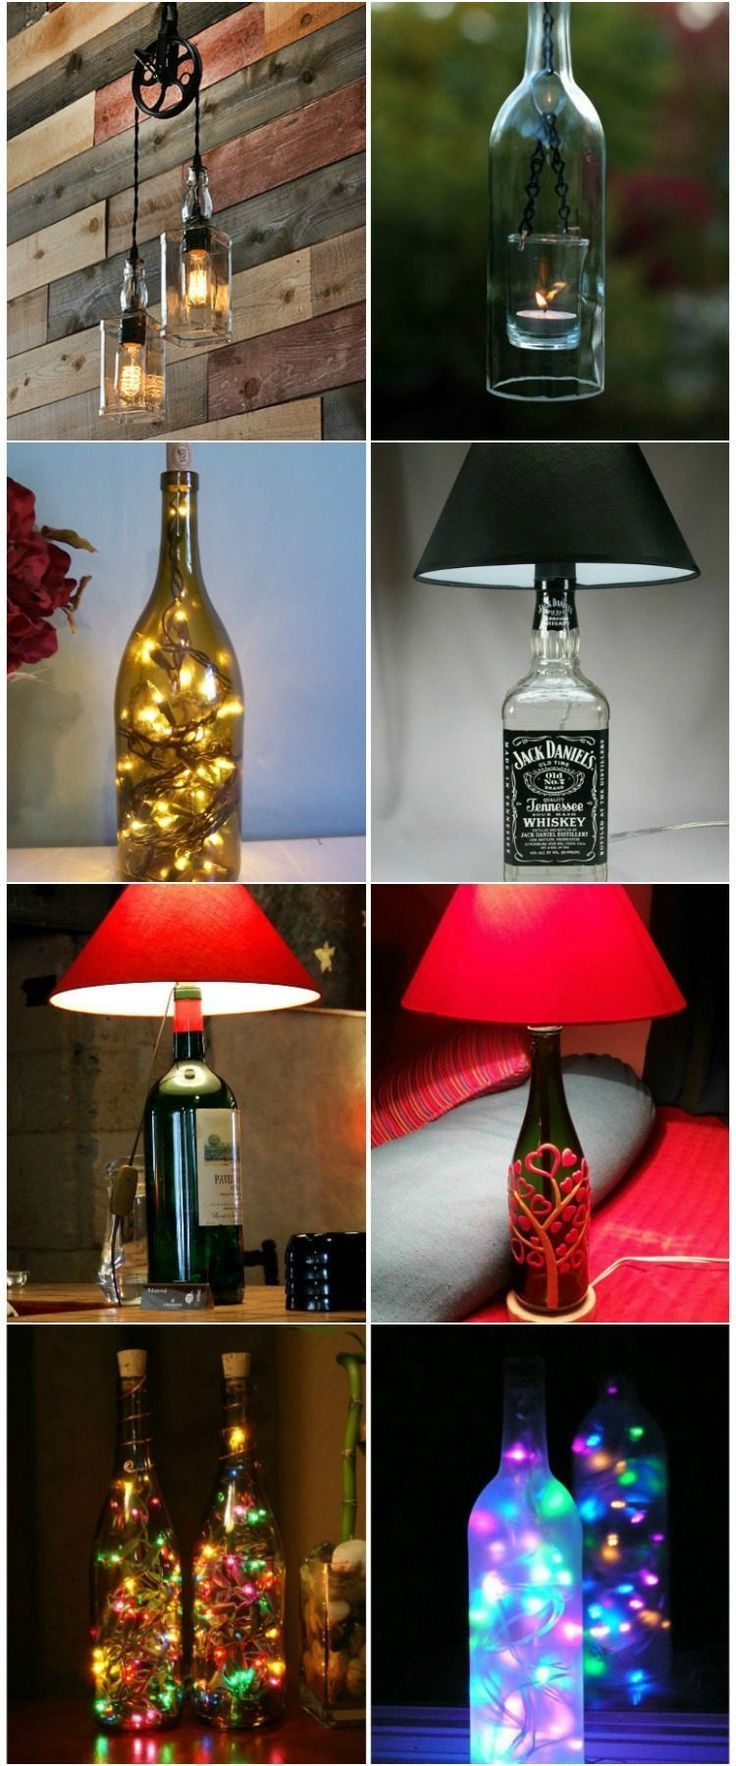 DIY Bottle Lamp: Make a Table Lamp with Recycled Bottles - iD Lights - DIY Bottle Lamp: Make a Table Lamp with Recycled Bottles - iD Lights -   18 diy Lamp bottle ideas